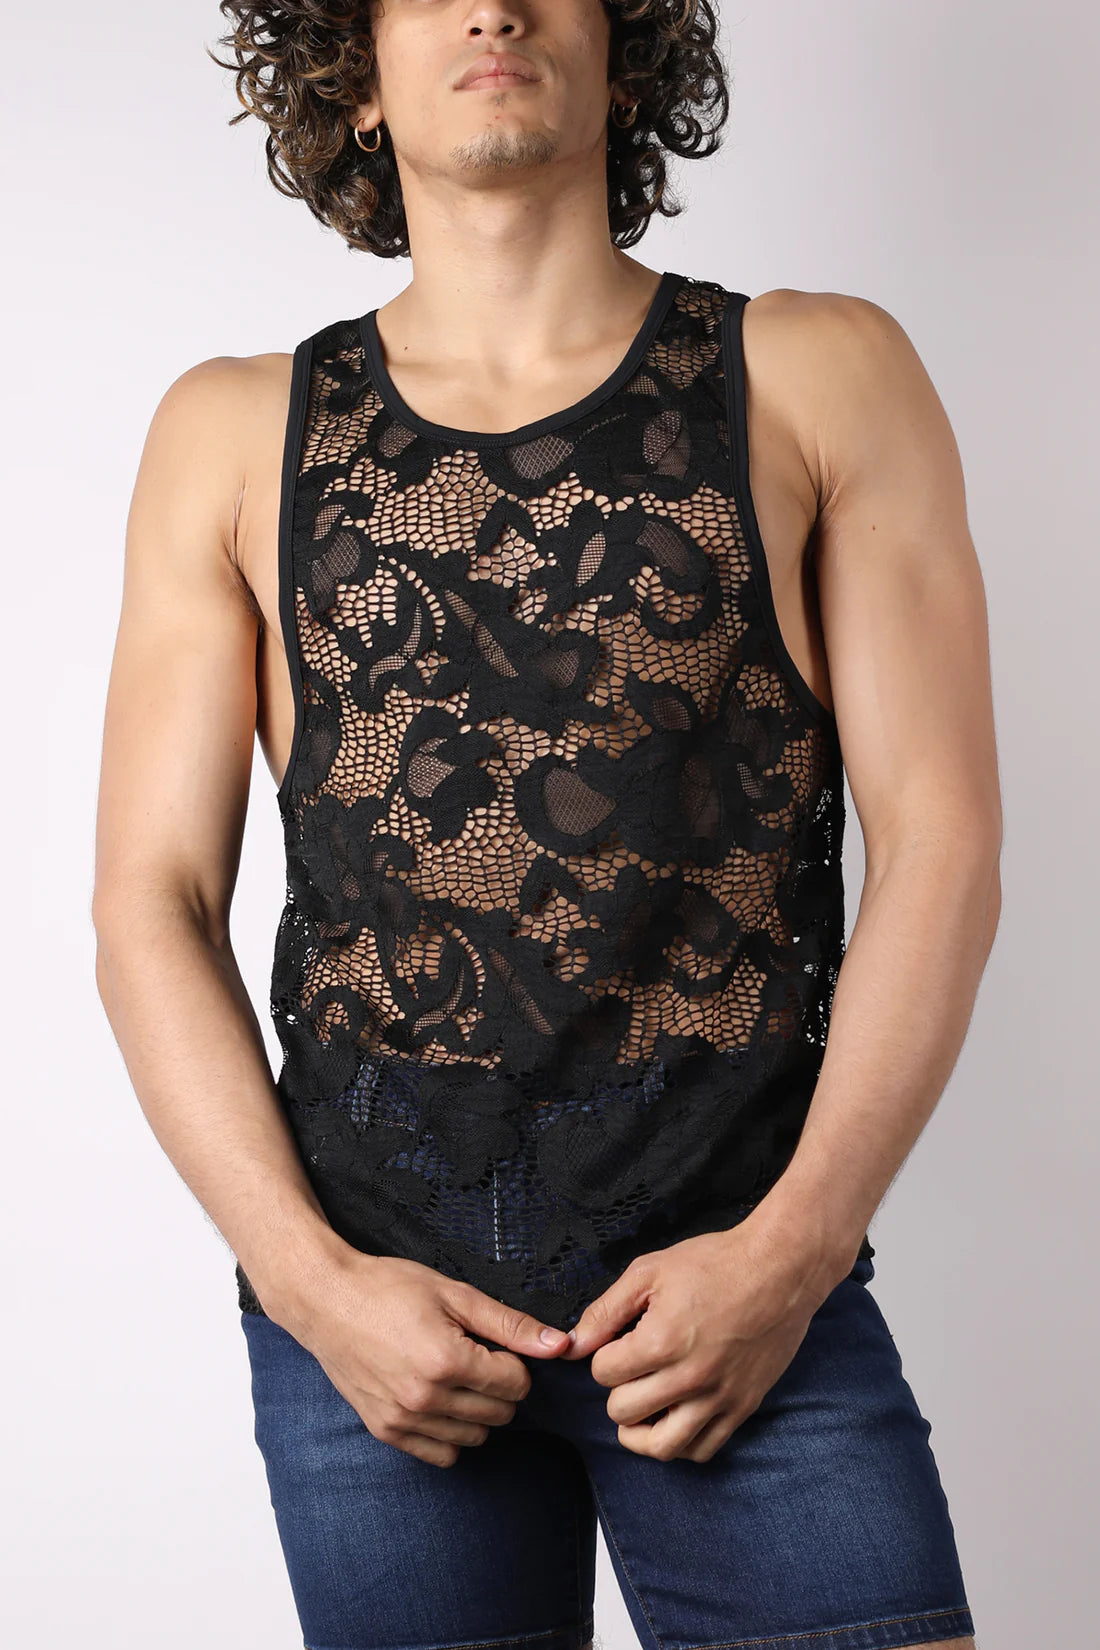 LACE UP MESH TANK TOP – Creative Male